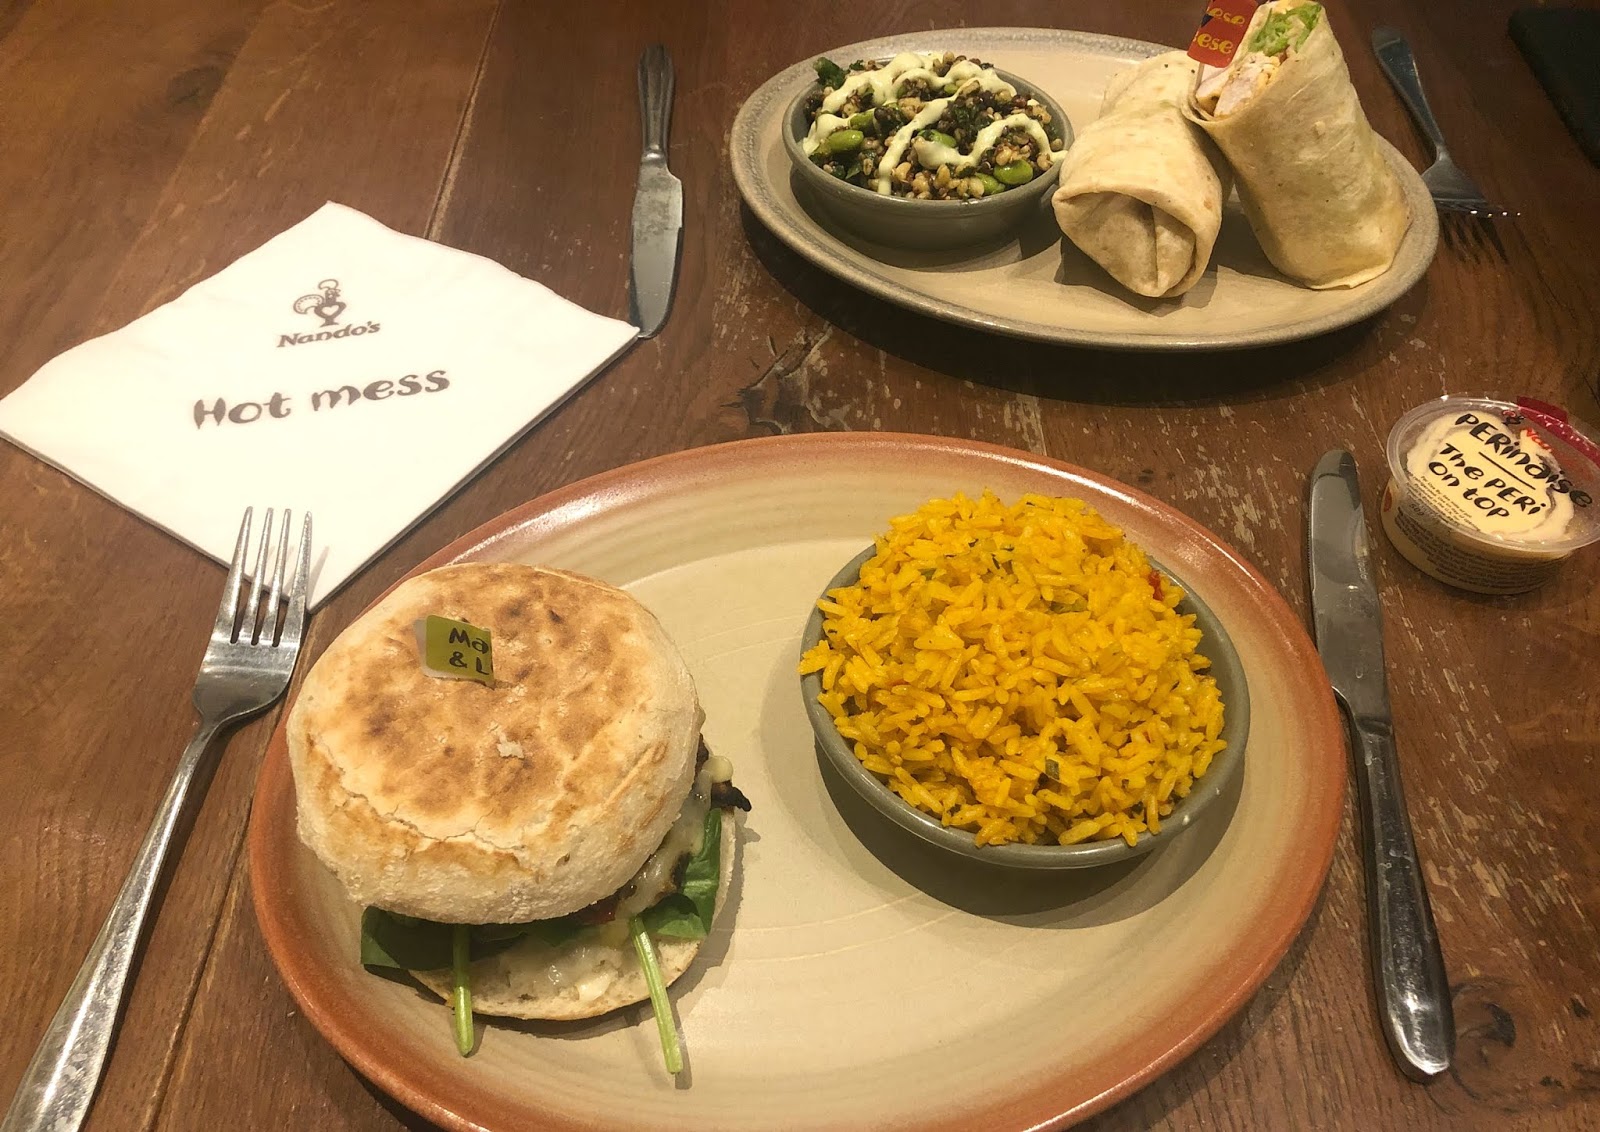 Date Night at The Gate Newcastle - Nandos